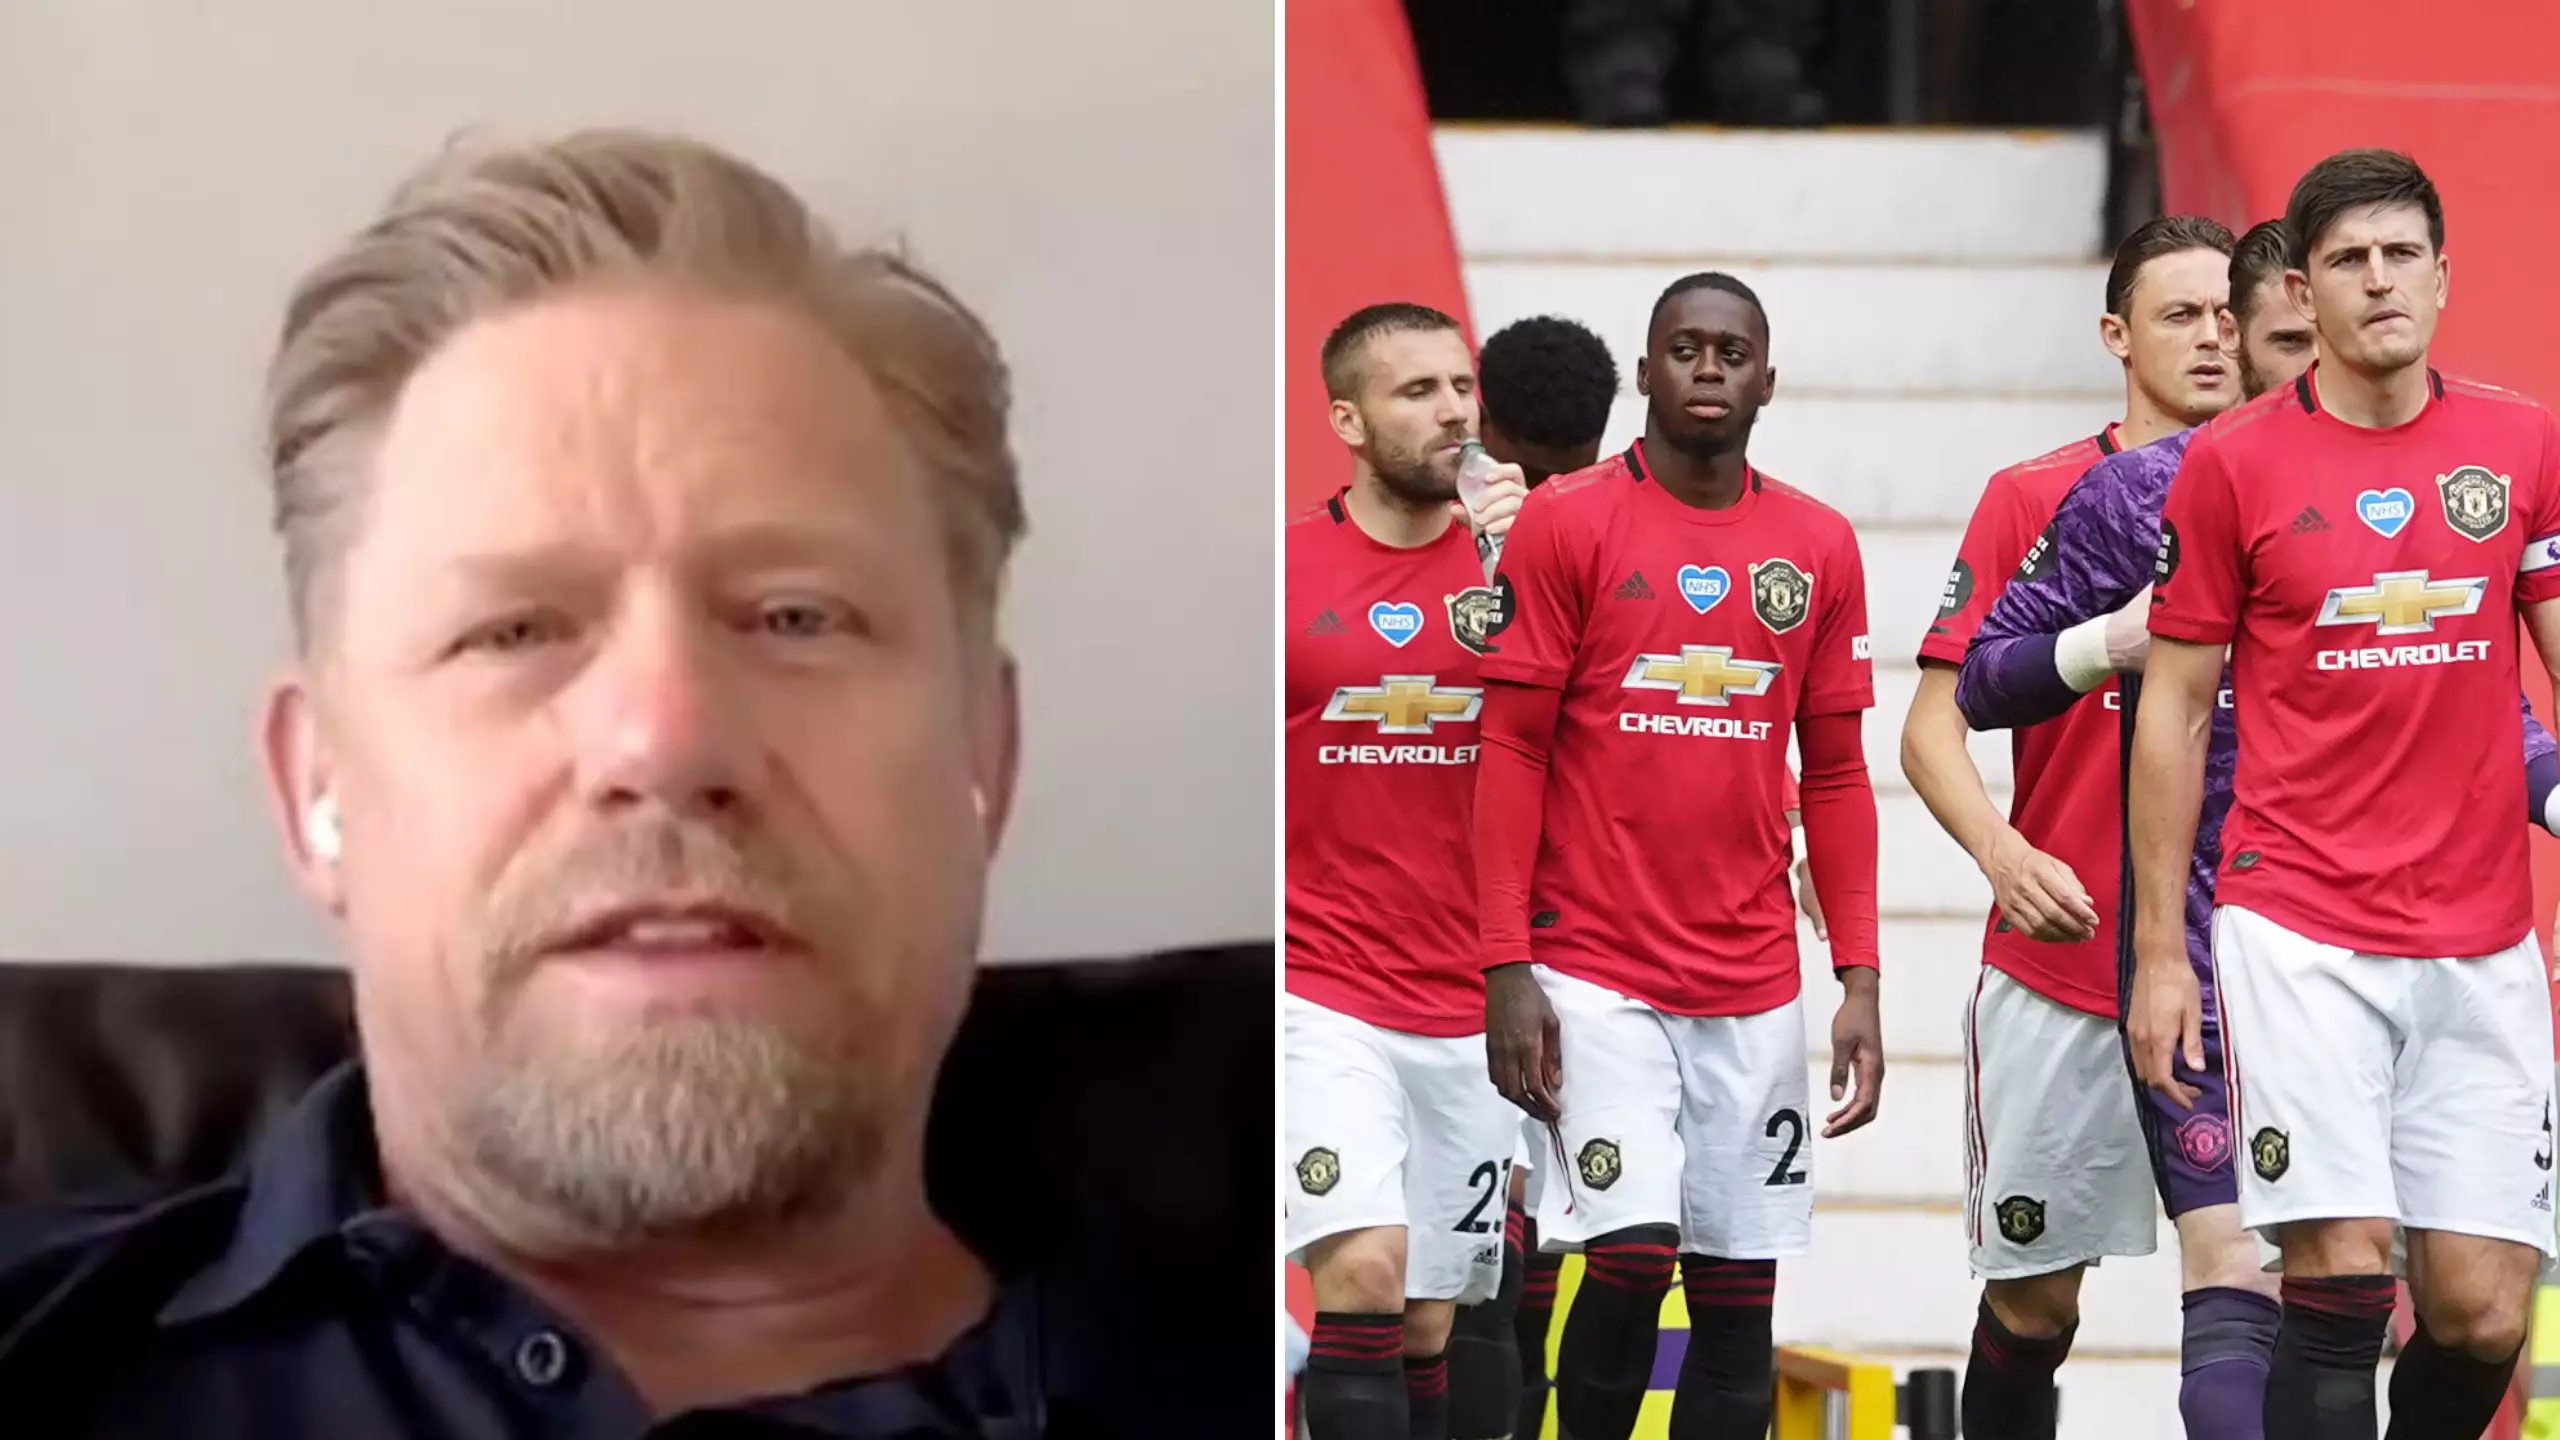 Peter Schmeichel Says "Shocking" Man Utd Player Doesn't Belong At The Club In Passionate Rant